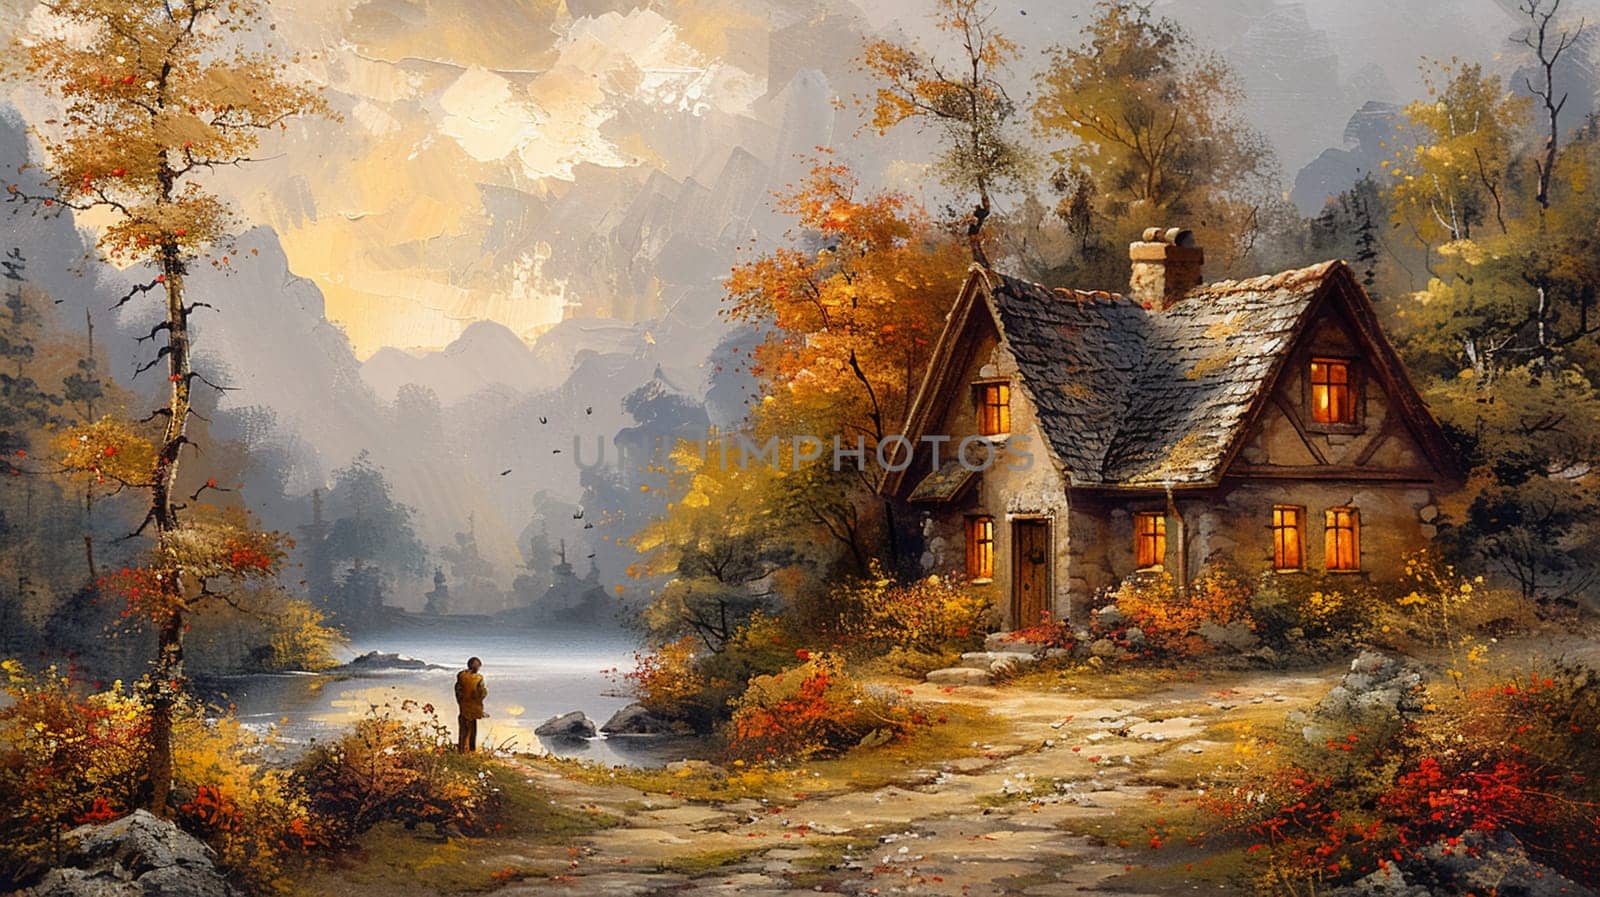 Drawing of a quaint cottage surrounded by enchanted woods, in a peaceful acrylic landscape.